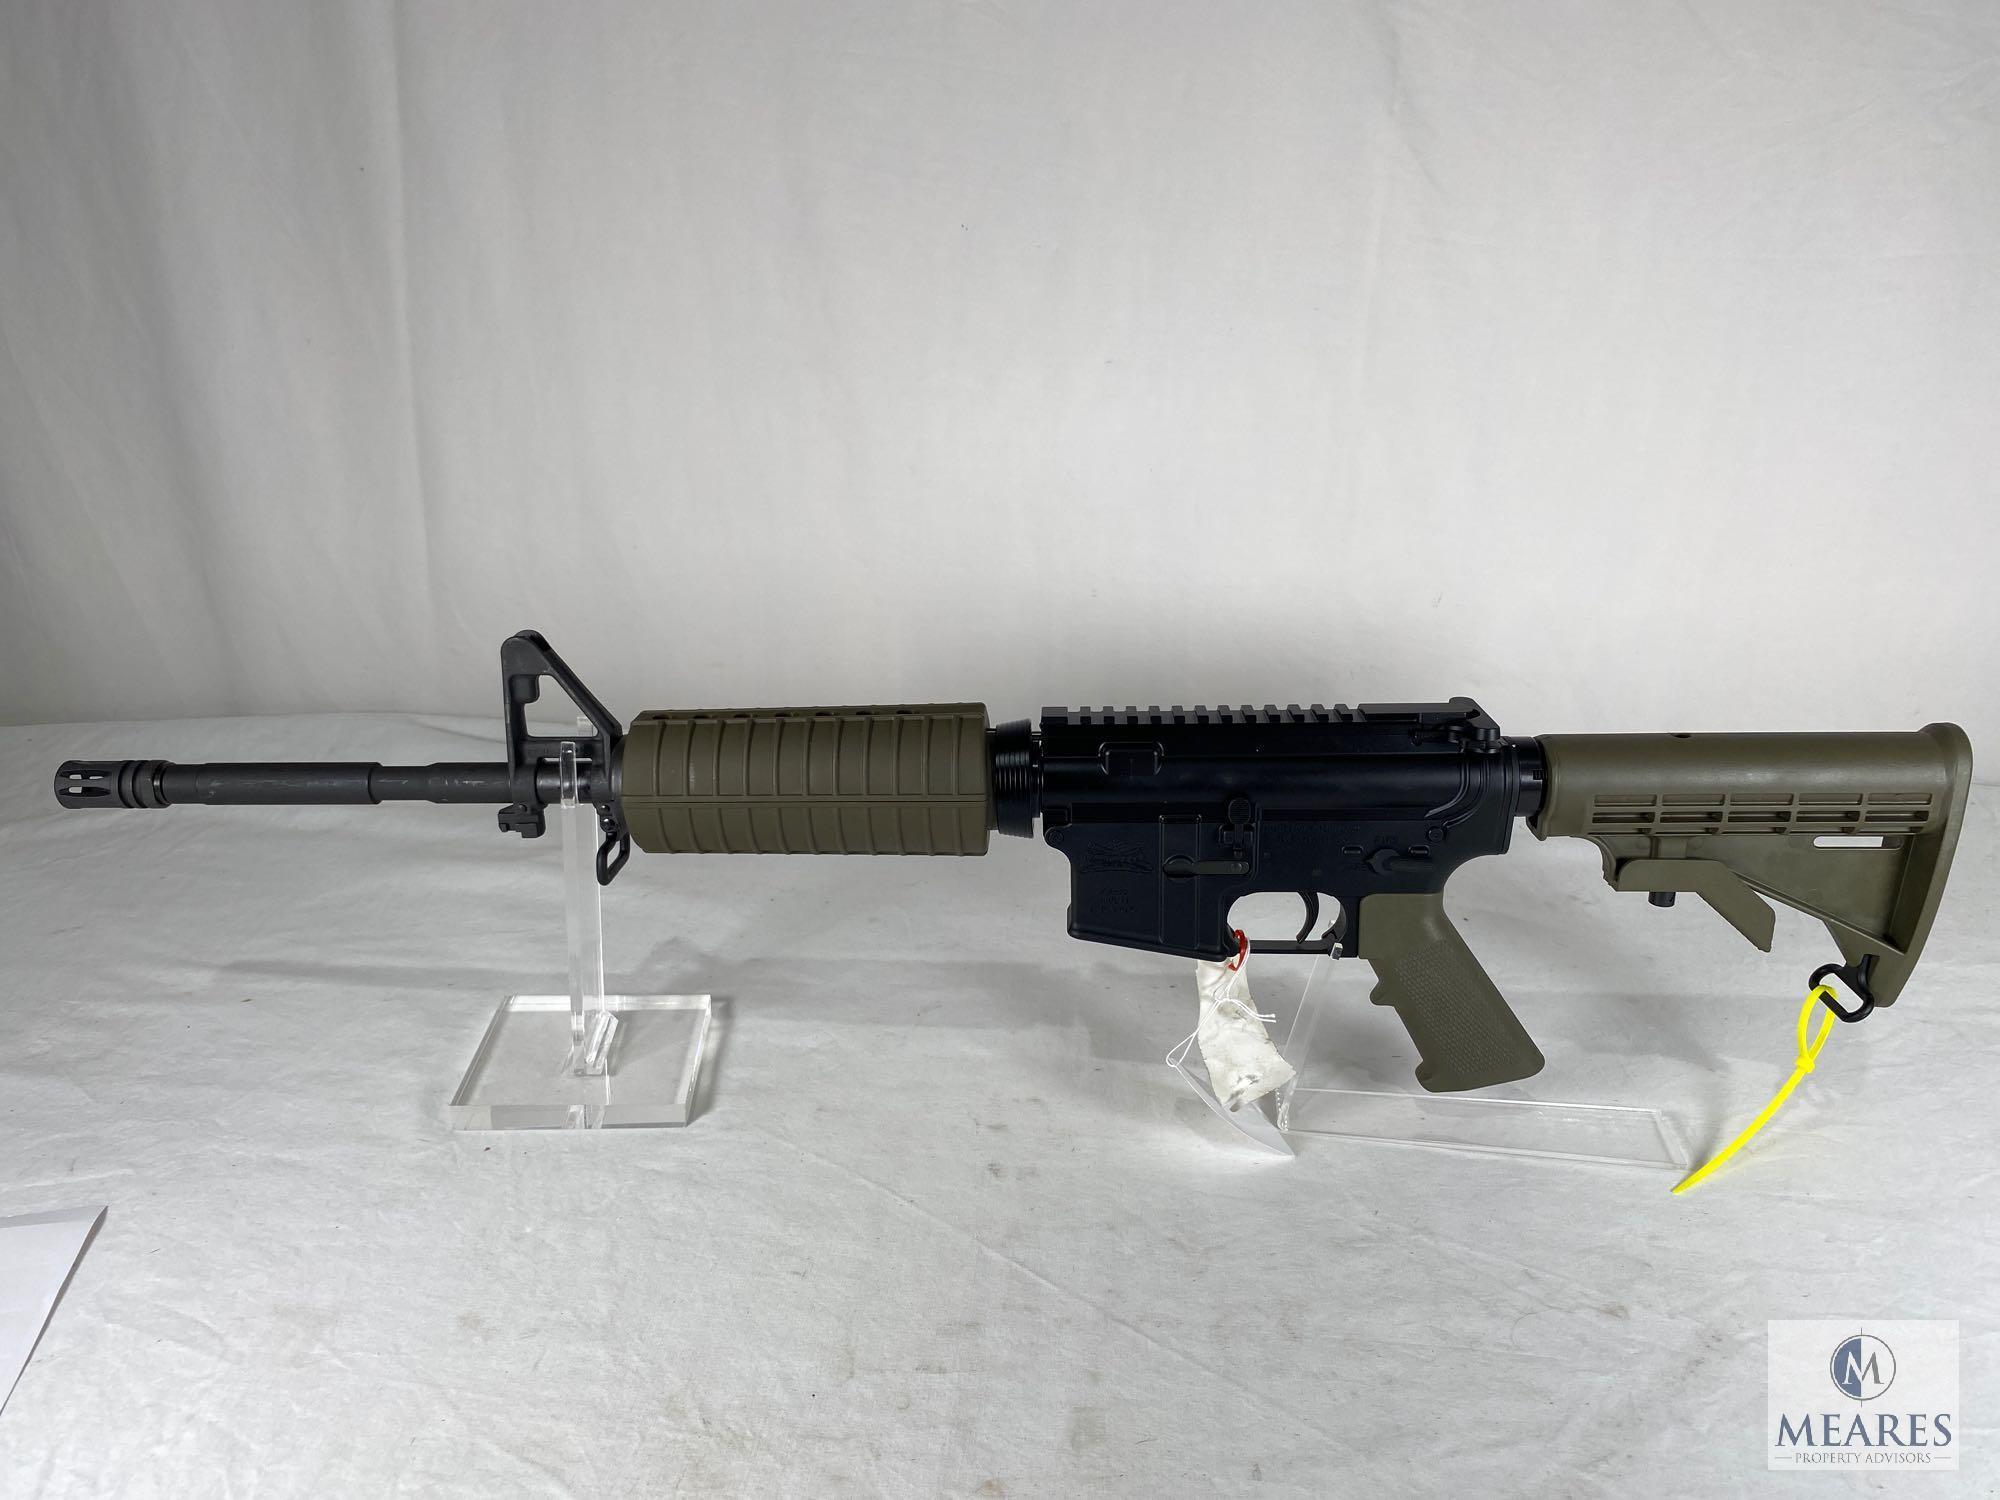 NEW IN THE BOX! PSA PA-15 16" M4 PHOSPHATE 5.56 NATO 1/7 CLASSIC RIFLE, OLIVE DRAB GREEN